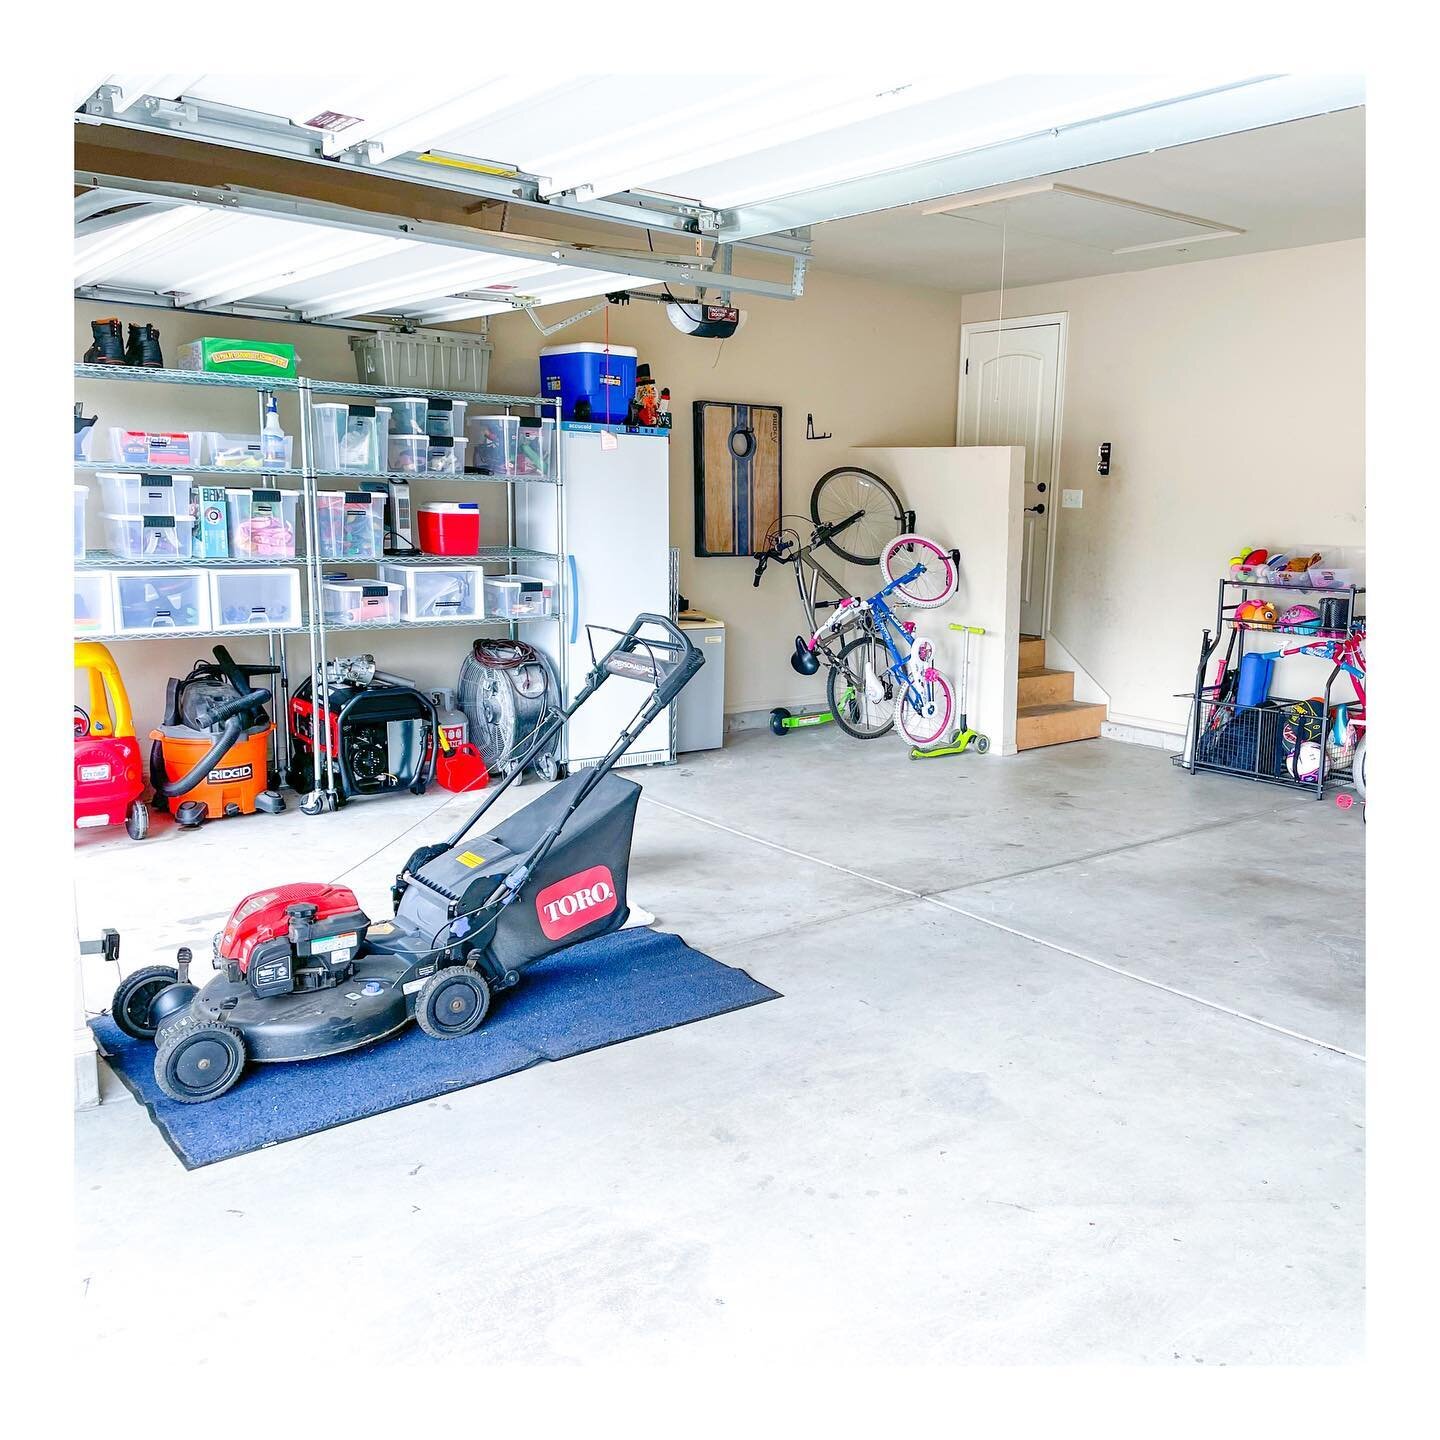 An organized garage for Mother&rsquo;s Day? What momma wants, momma gets! We have had so many wonderful garage projects in the month of April and May and we are gearing up to do another today! 
&bull;
&bull;
&bull;
#labeledlivingllc #professionalorga